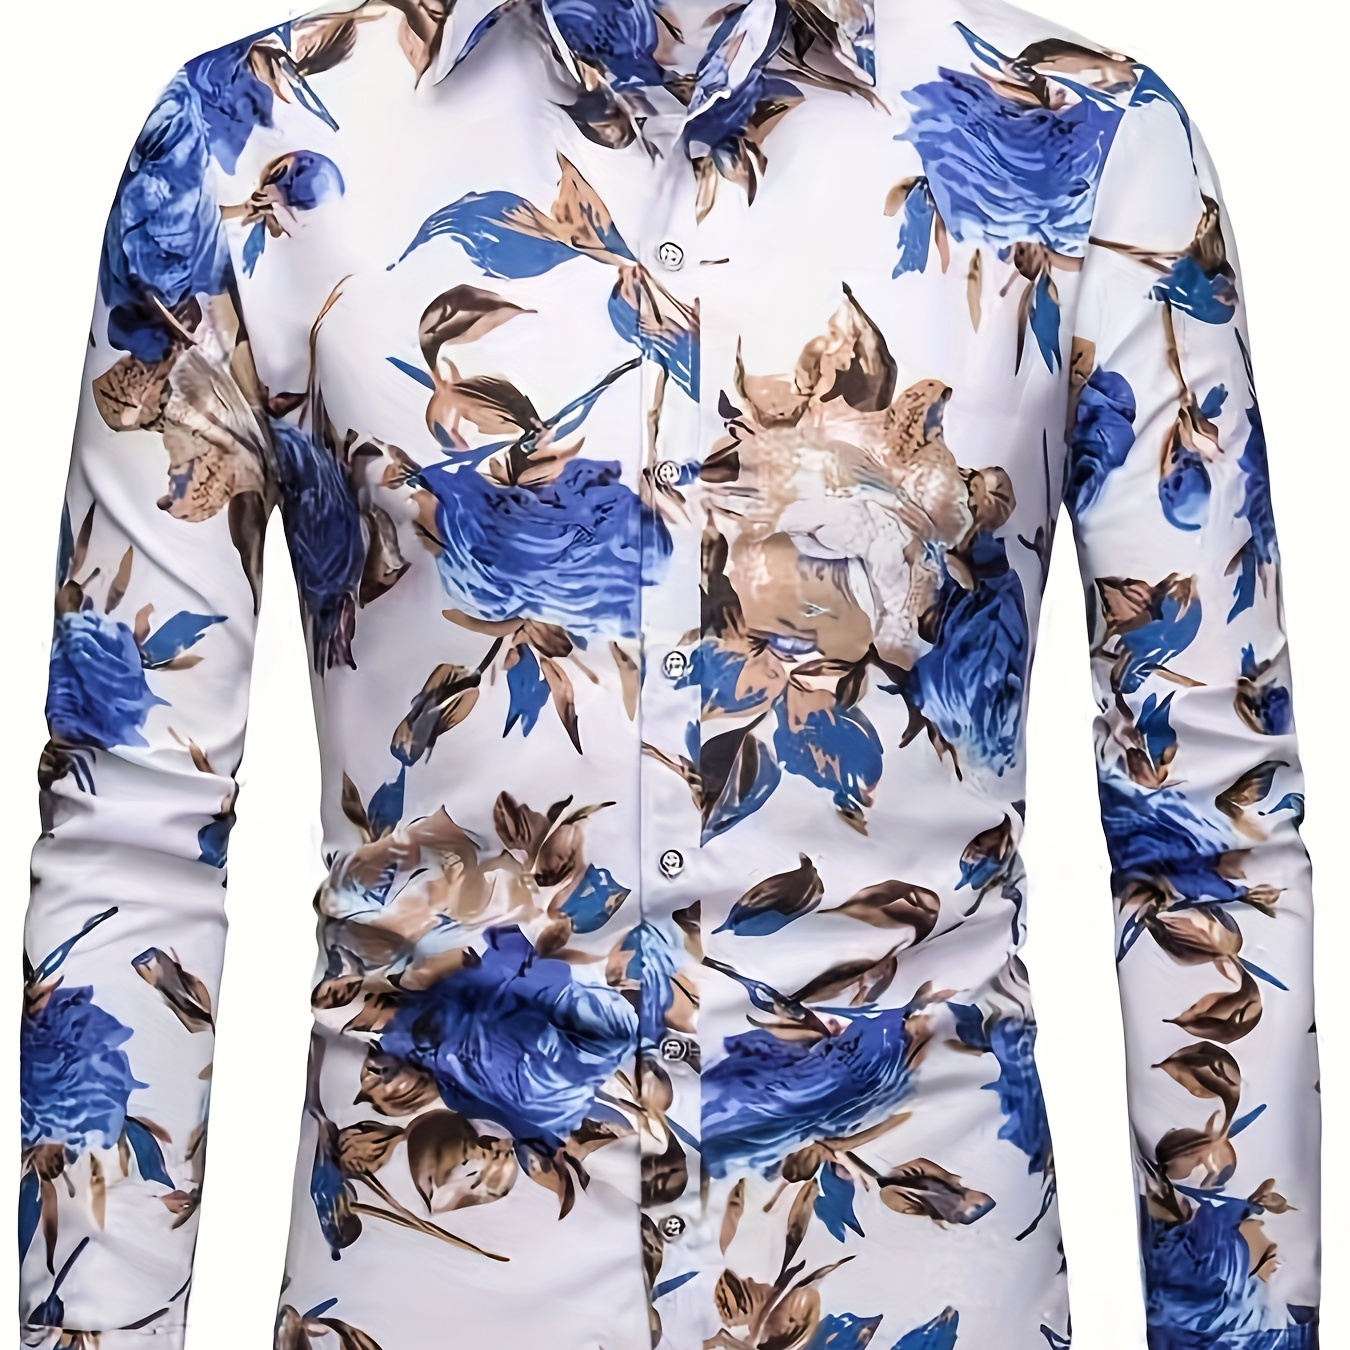 

Floral Print Men's Summer Fashionable And Simple Long Sleeve Button Casual Lapel Shirt, Trendy And Versatile, Suitable For Dates, Beach Holiday, As Gifts